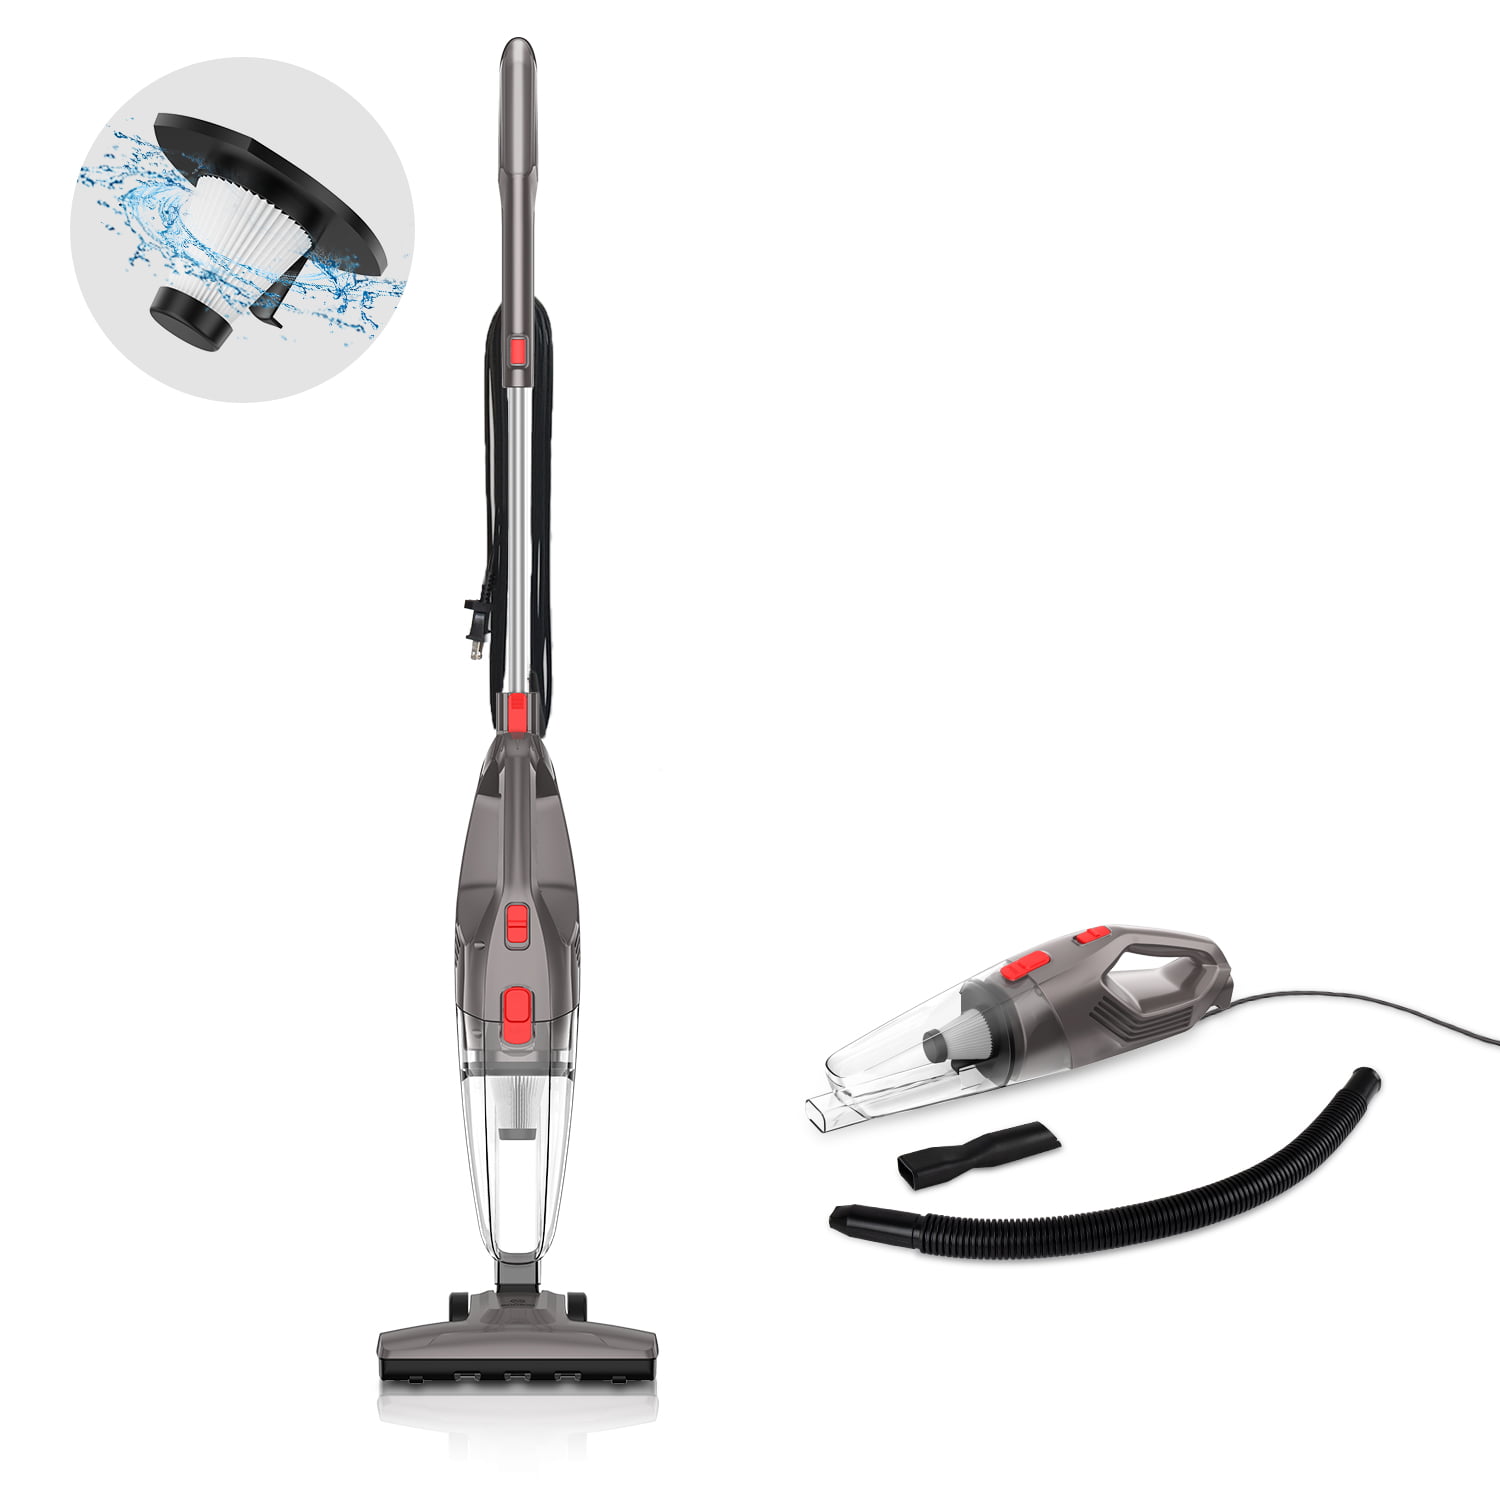 Details about   Hoover UH70600 Windtunnel Max Multi-Cyclonic Vacuum Cleaner "REPLACEMENT PARTS" 